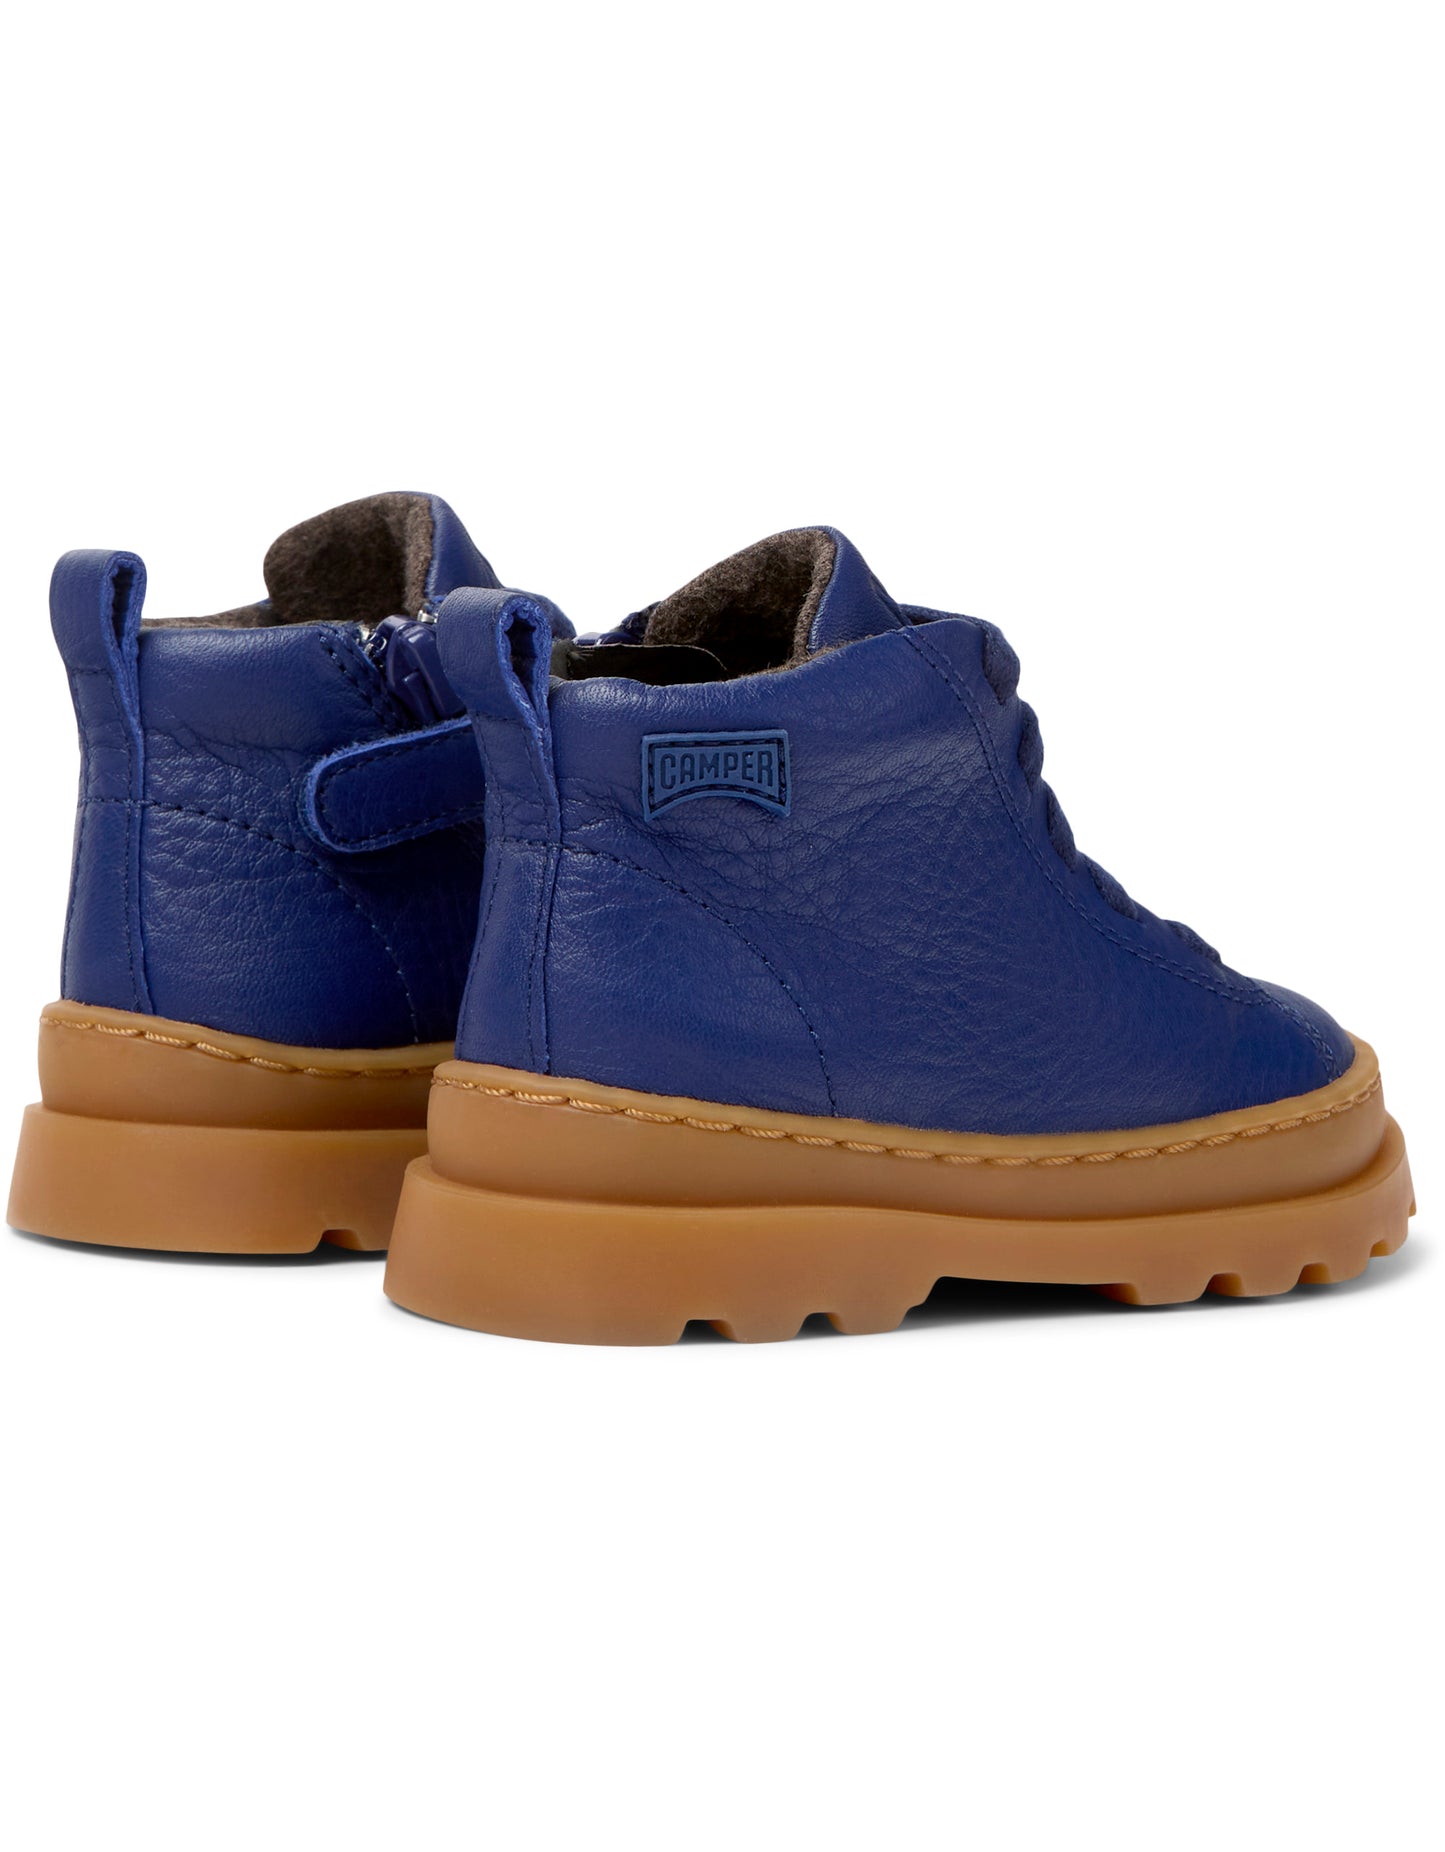 A pair of boys boots by Camper, style K900291-003, in blue leather with lace and zip fastening. Angled view.